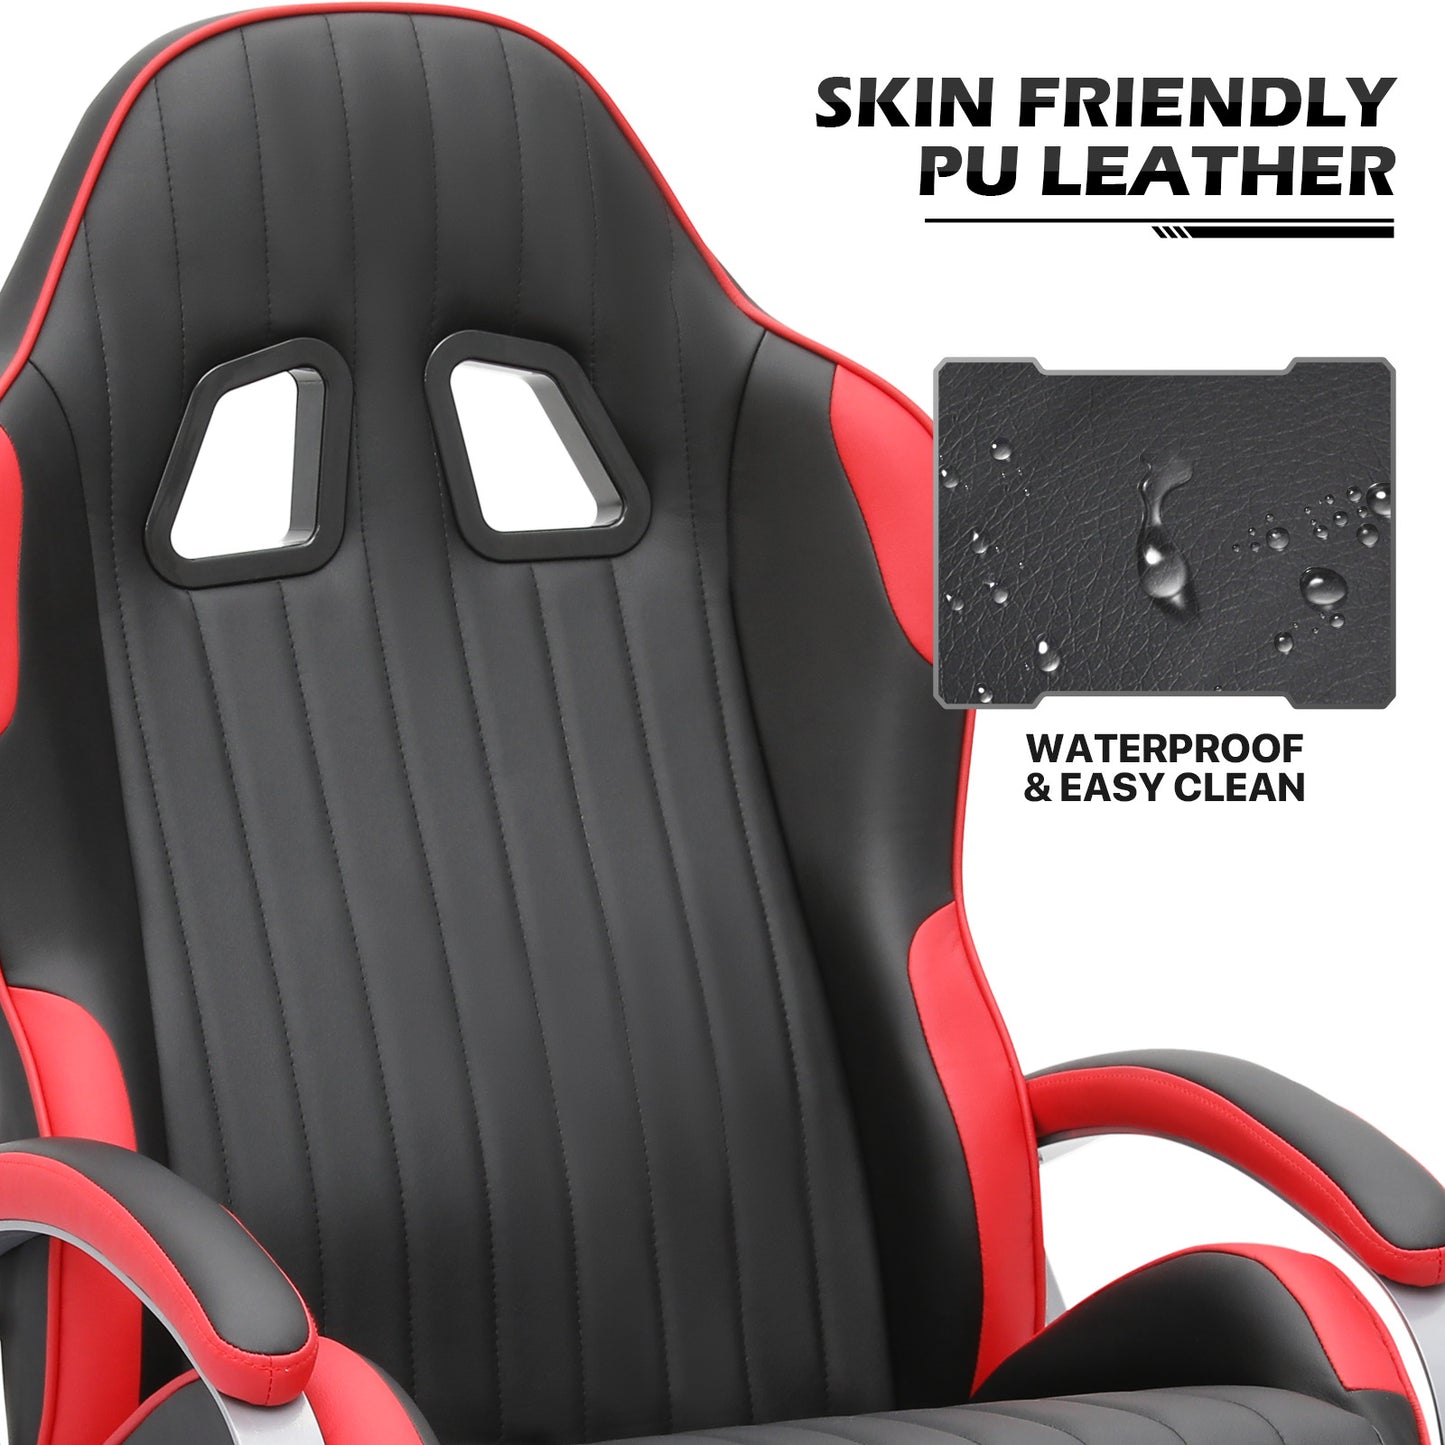 Gaming Chair with Ottoman - PU Leather